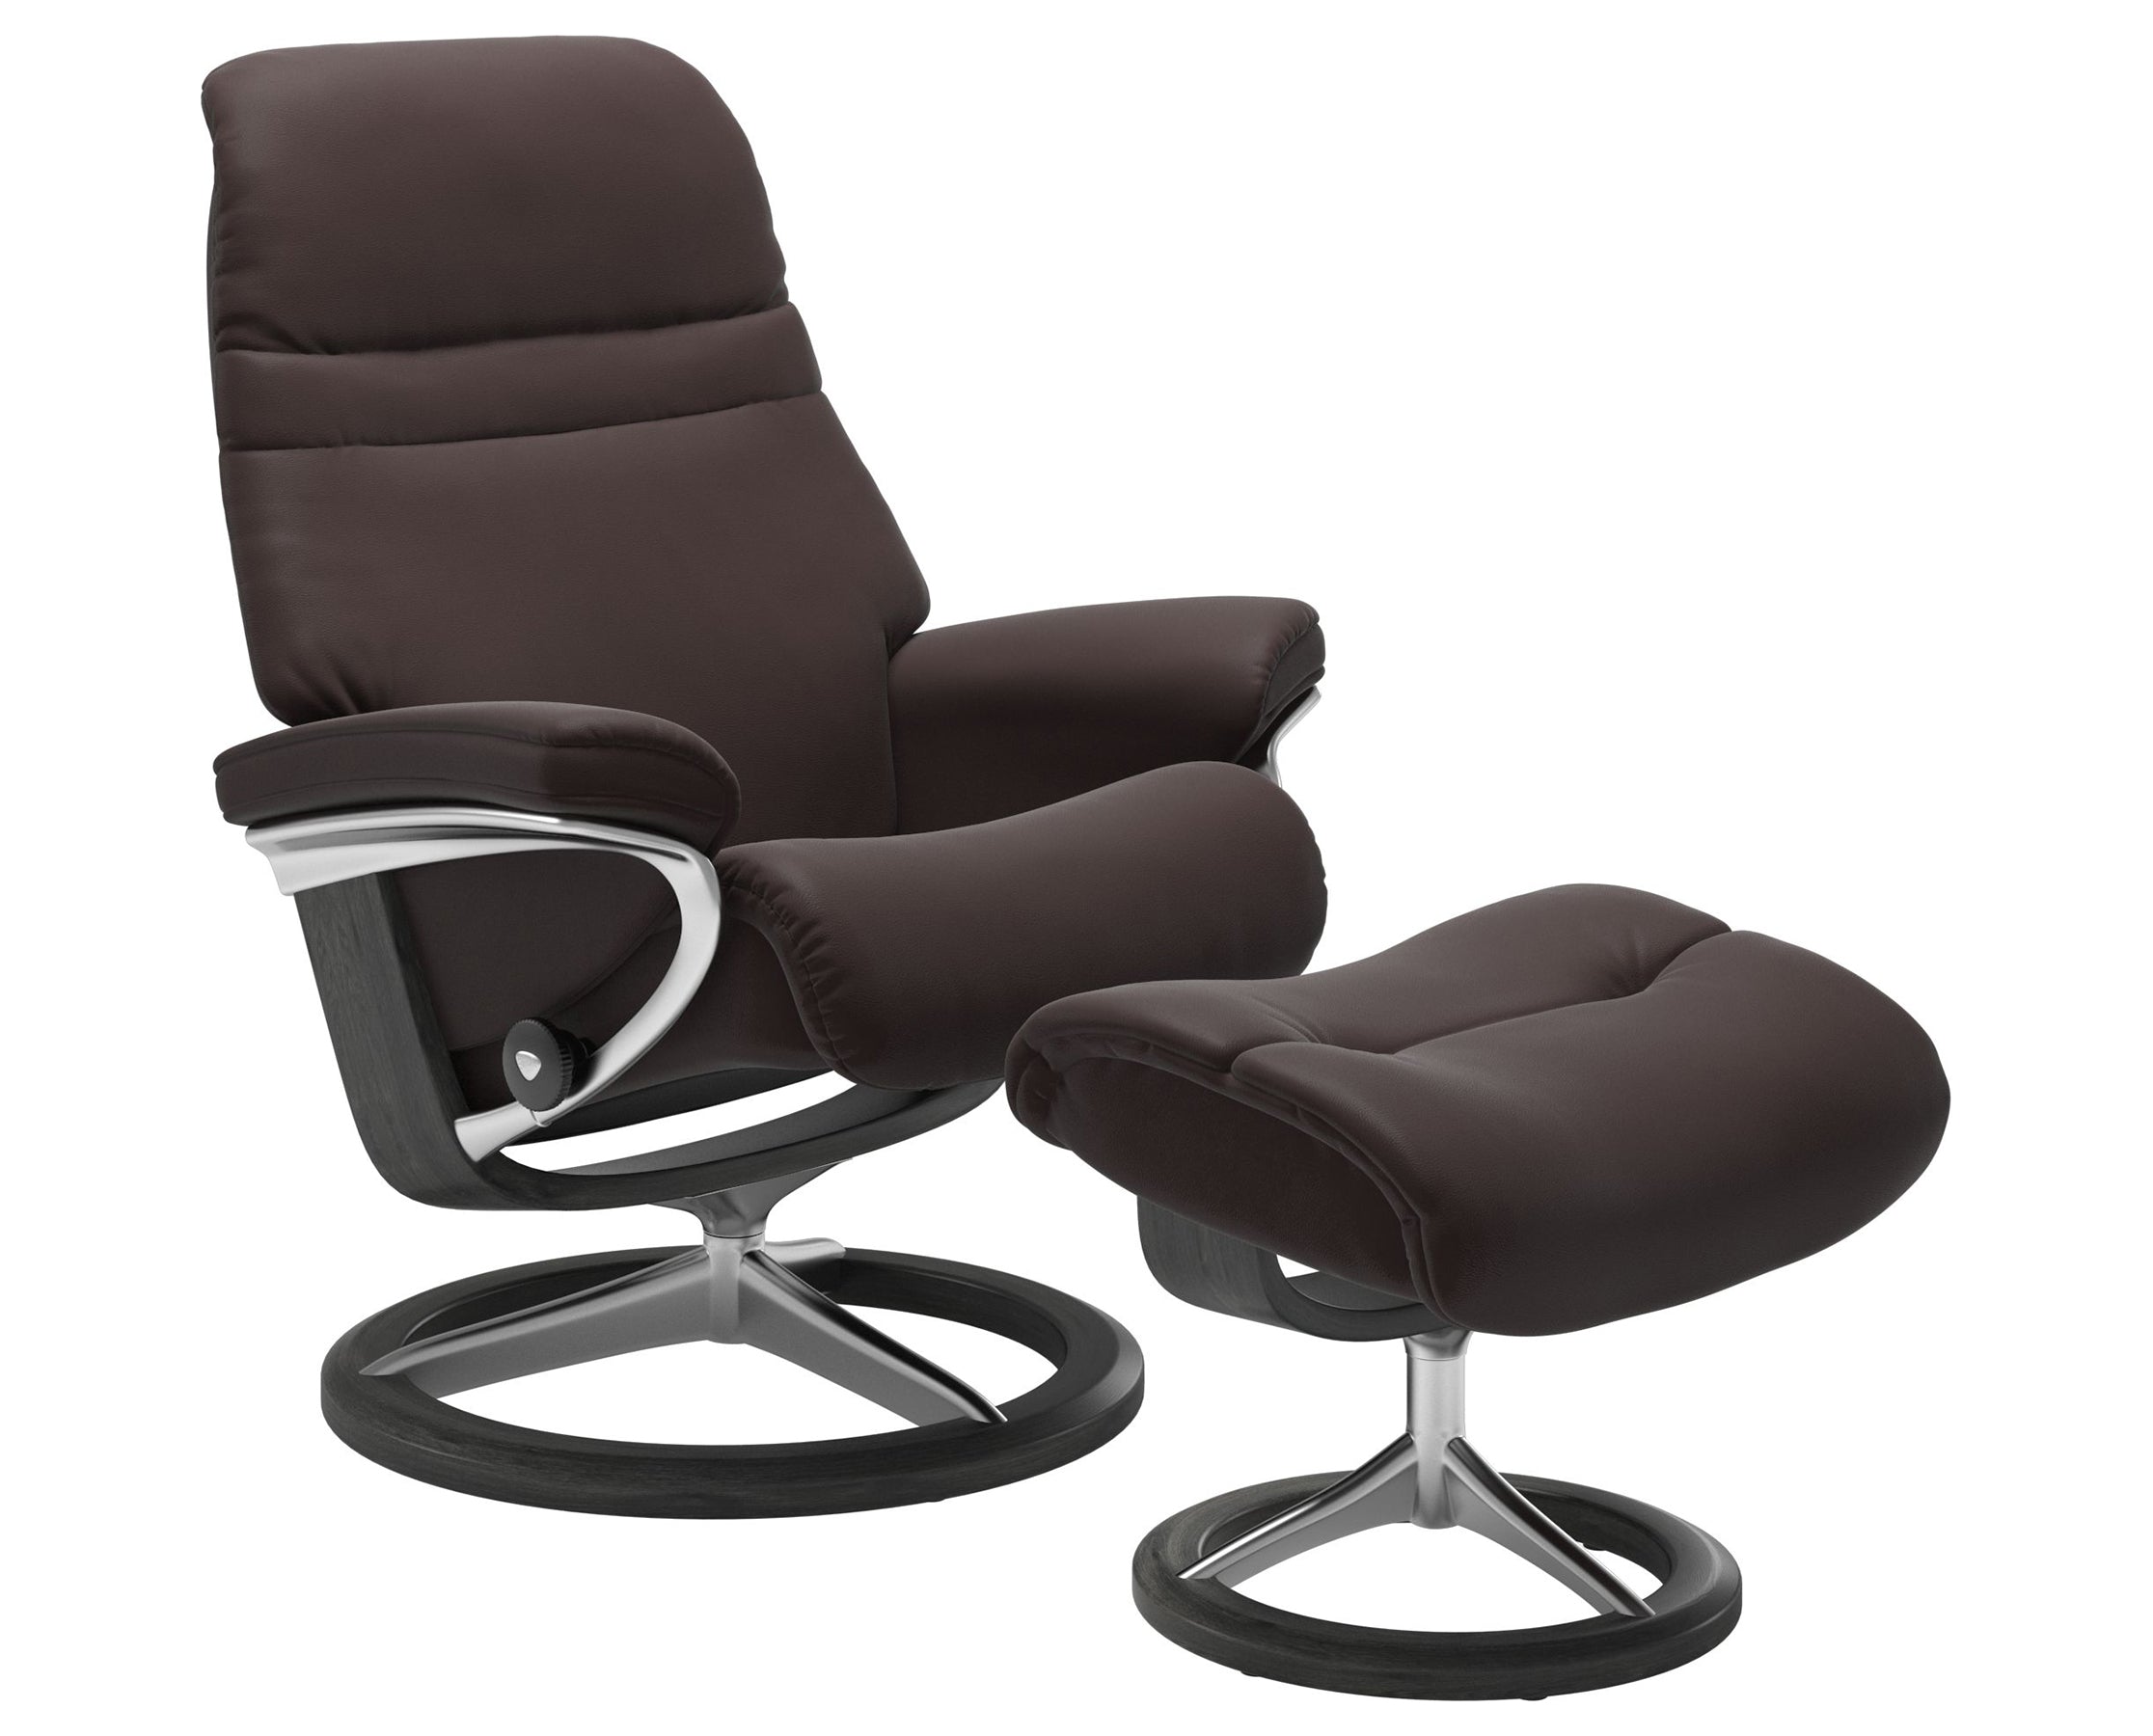 Paloma Leather Chocolate S/M/L and Grey Base | Stressless Sunrise Signature Recliner | Valley Ridge Furniture